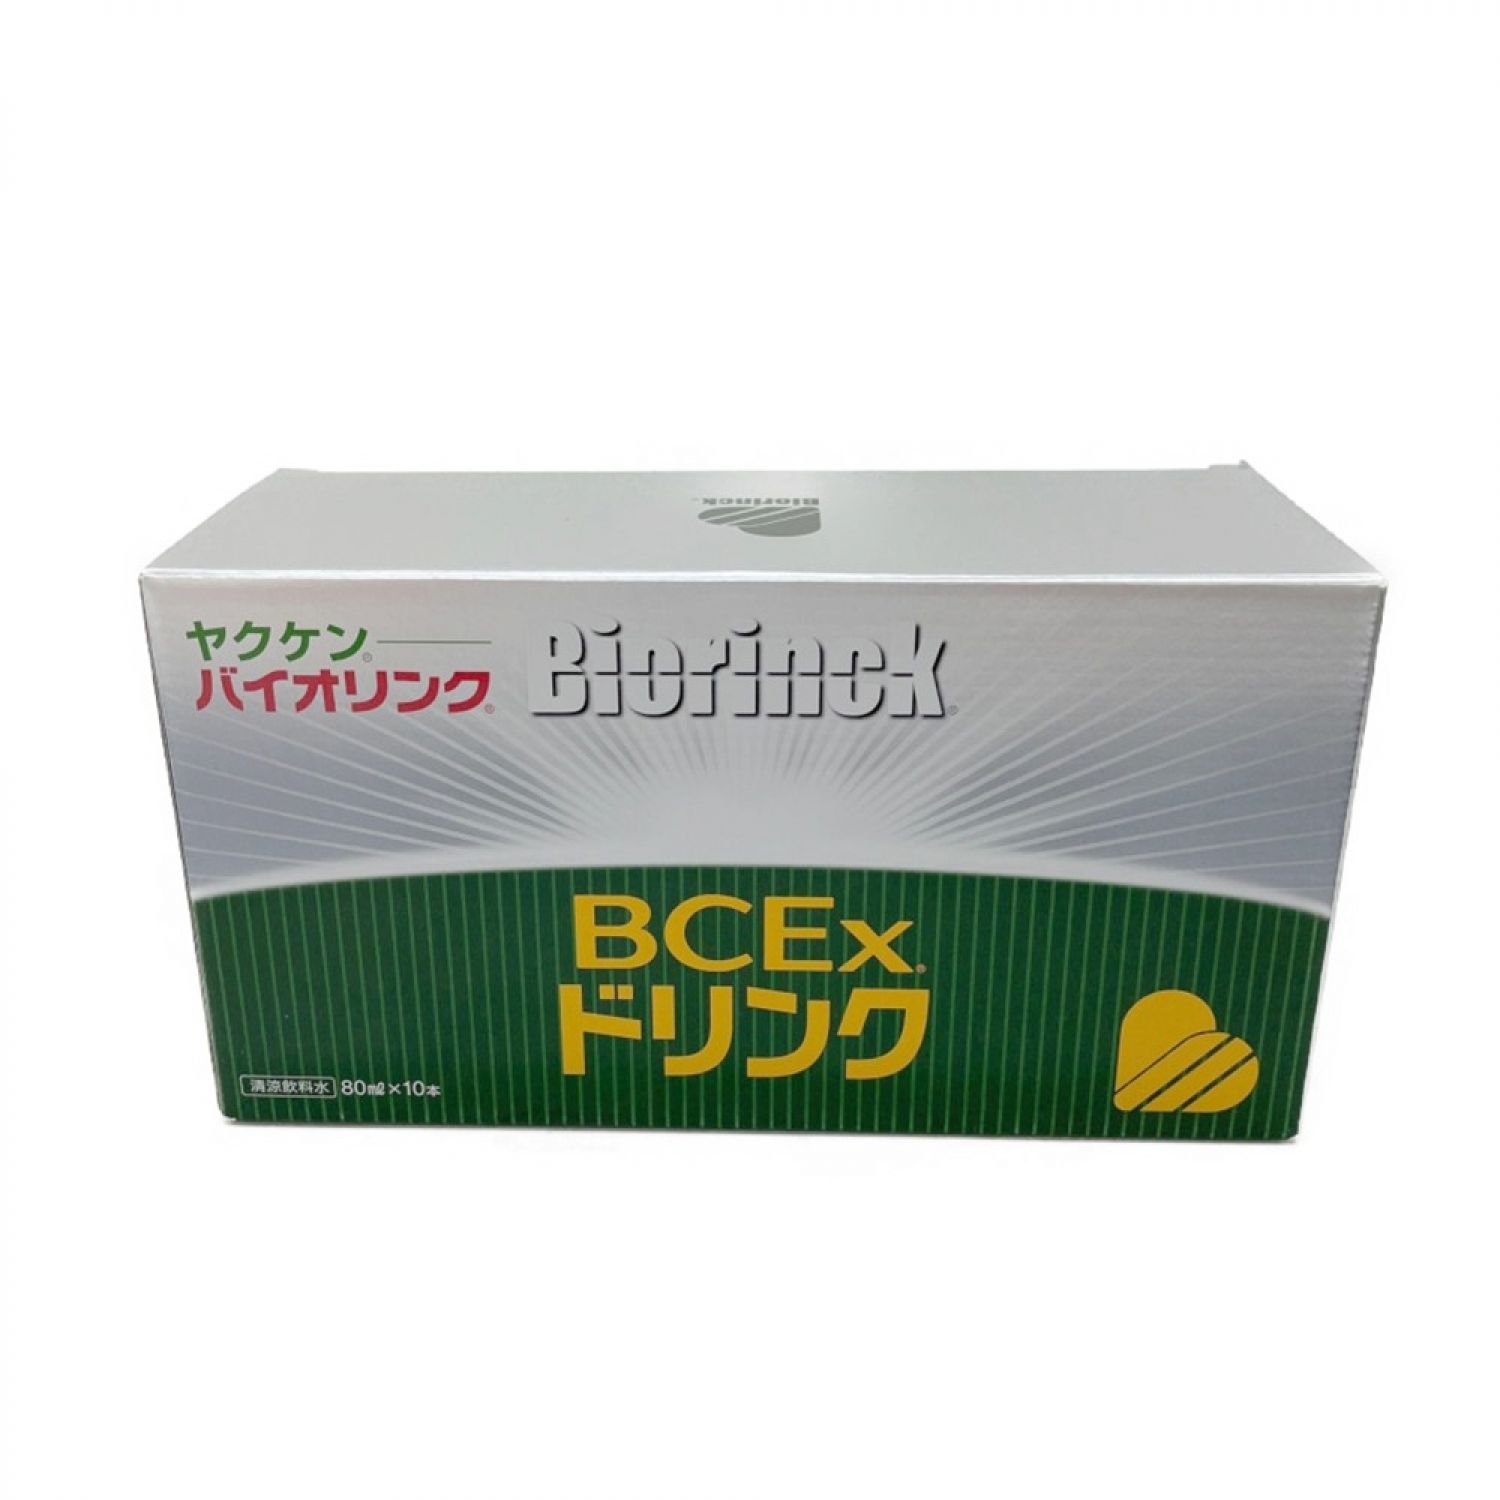 BCExドリンク食品・飲料・酒